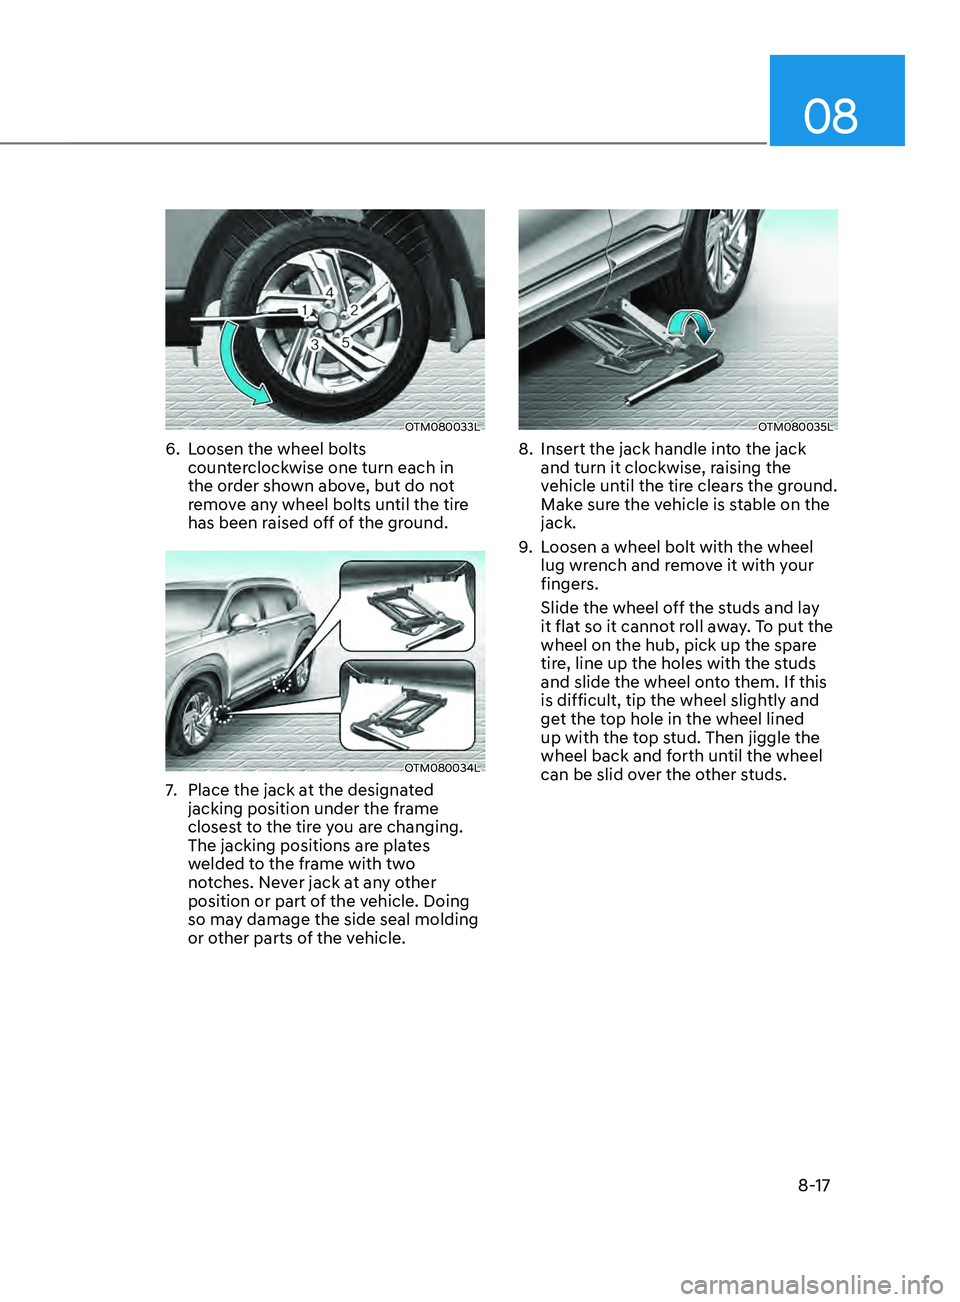 HYUNDAI SANTA FE CALLIGRAPHY 2021  Owners Manual 08
8-17
OTM080033L
6. Loosen the wheel bolts 
counterclockwise one turn each in 
the order shown above, but do not 
remove any wheel bolts until the tire 
has been raised off of the ground.
OTM080034L